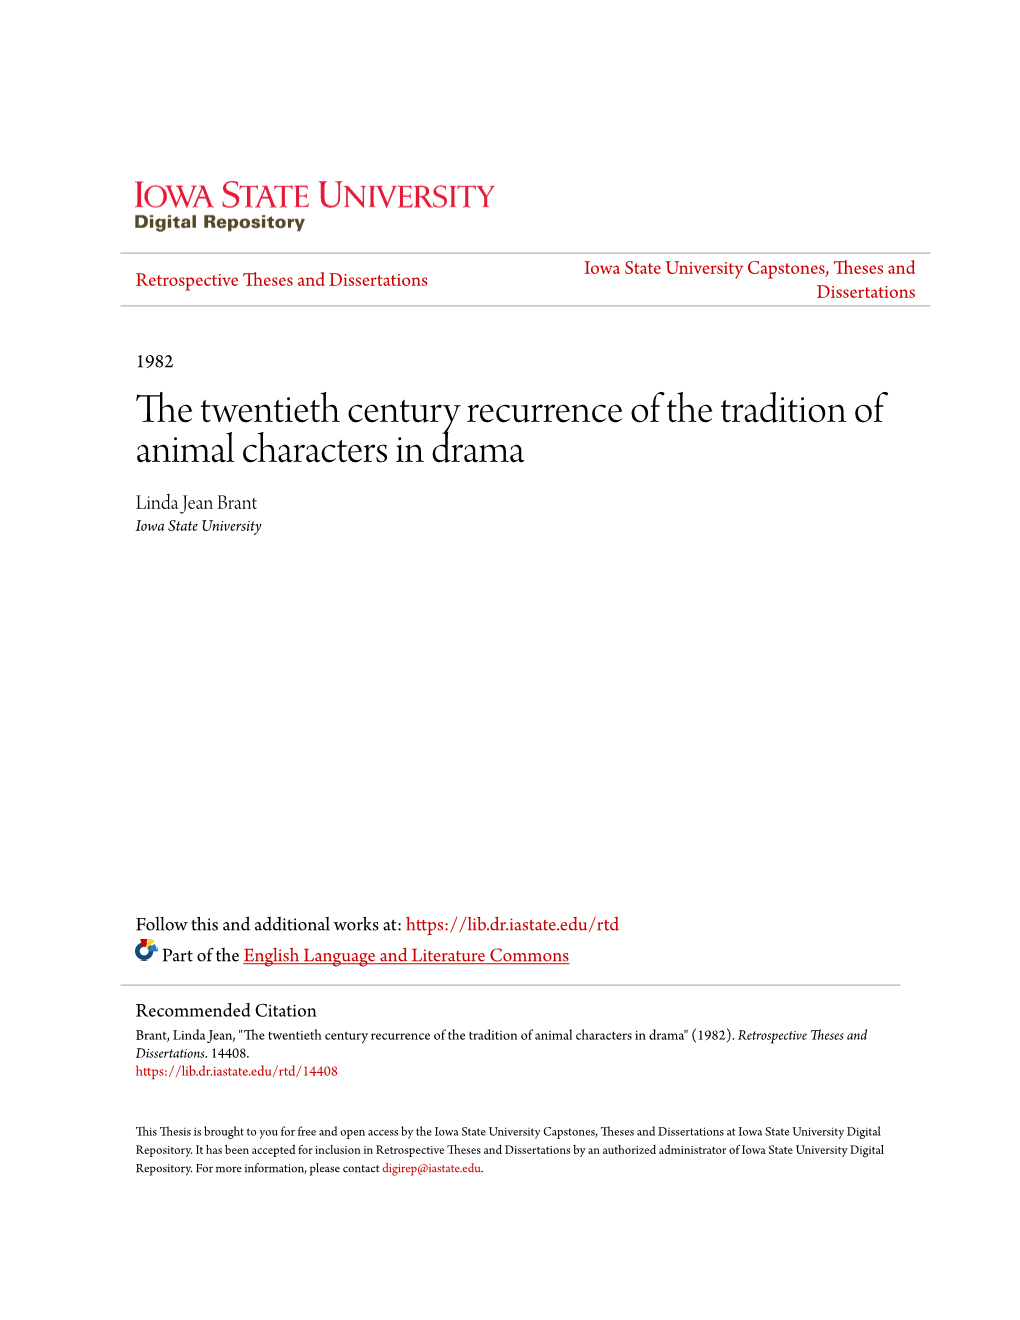 The Twentieth Century Recurrence of the Tradition of Animal Characters in Drama Linda Jean Brant Iowa State University